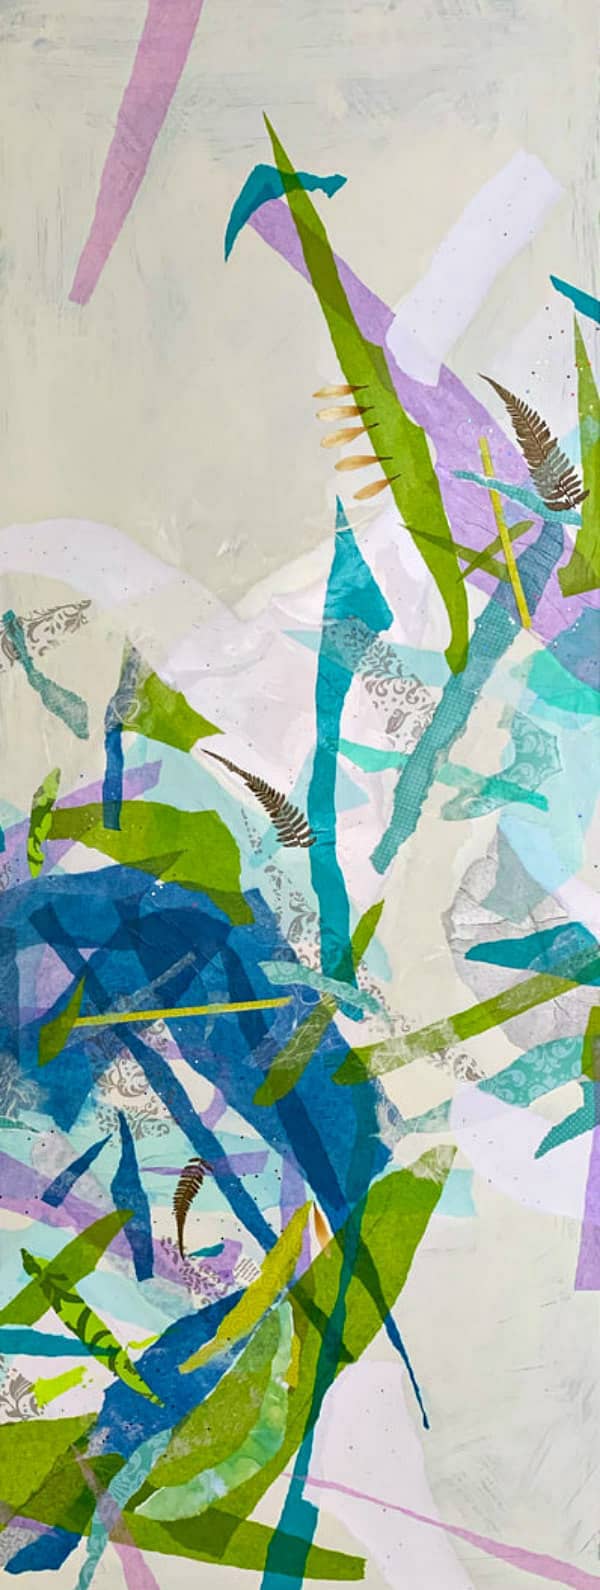 Collage of colorful torn paper with bits of fern in aqua, lime green and lavender tones